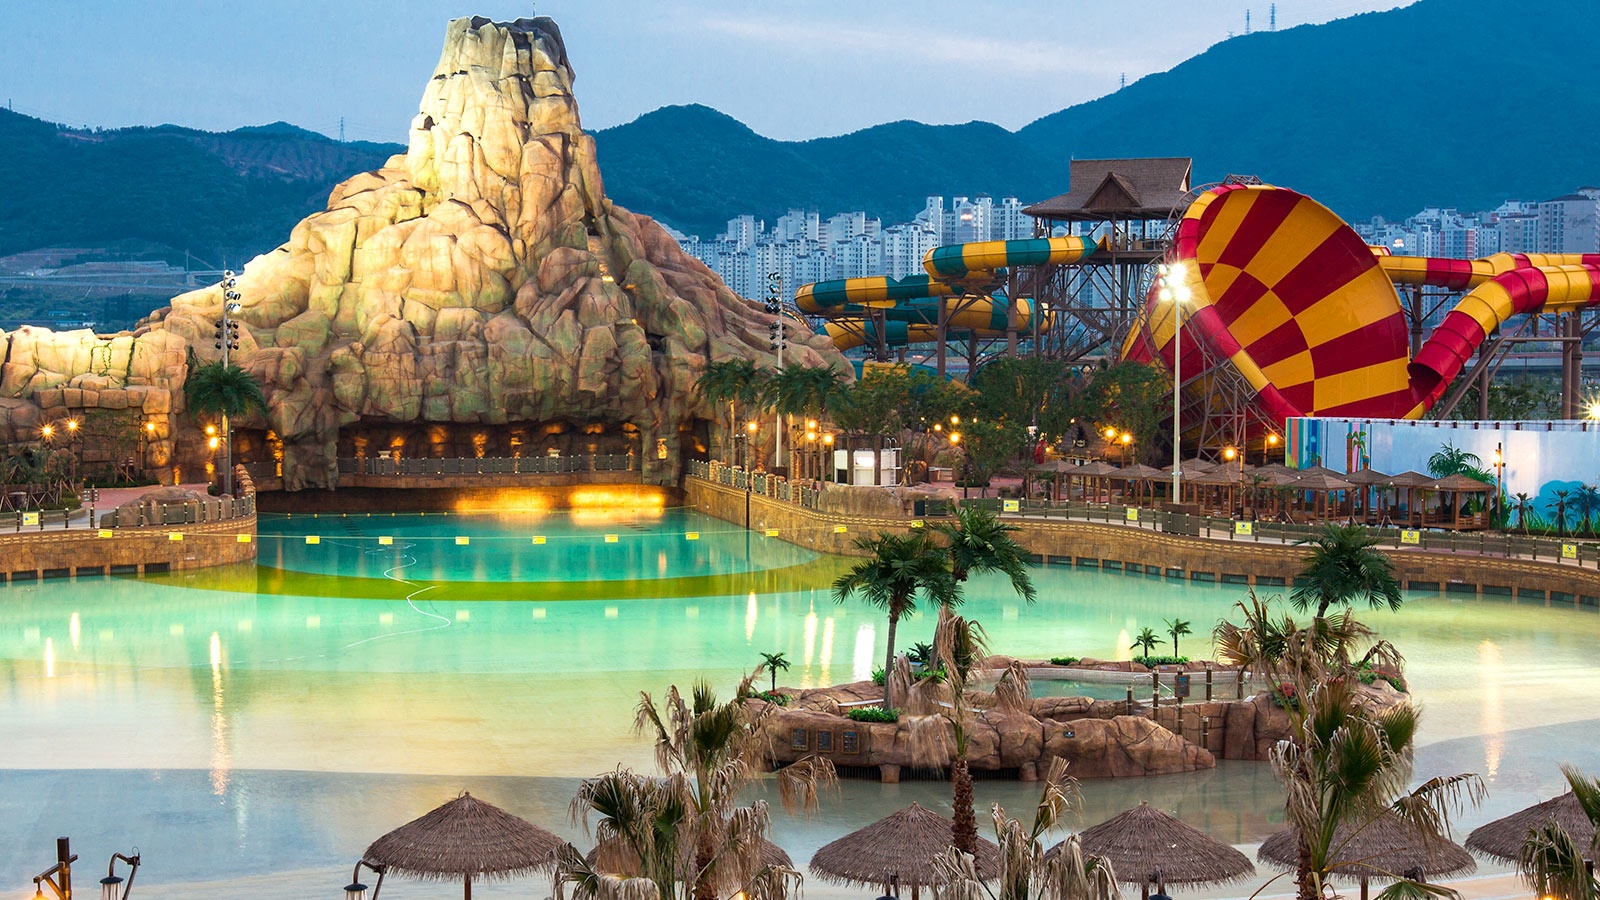 Overview, Lotte Gimhae Waterpark, Korea